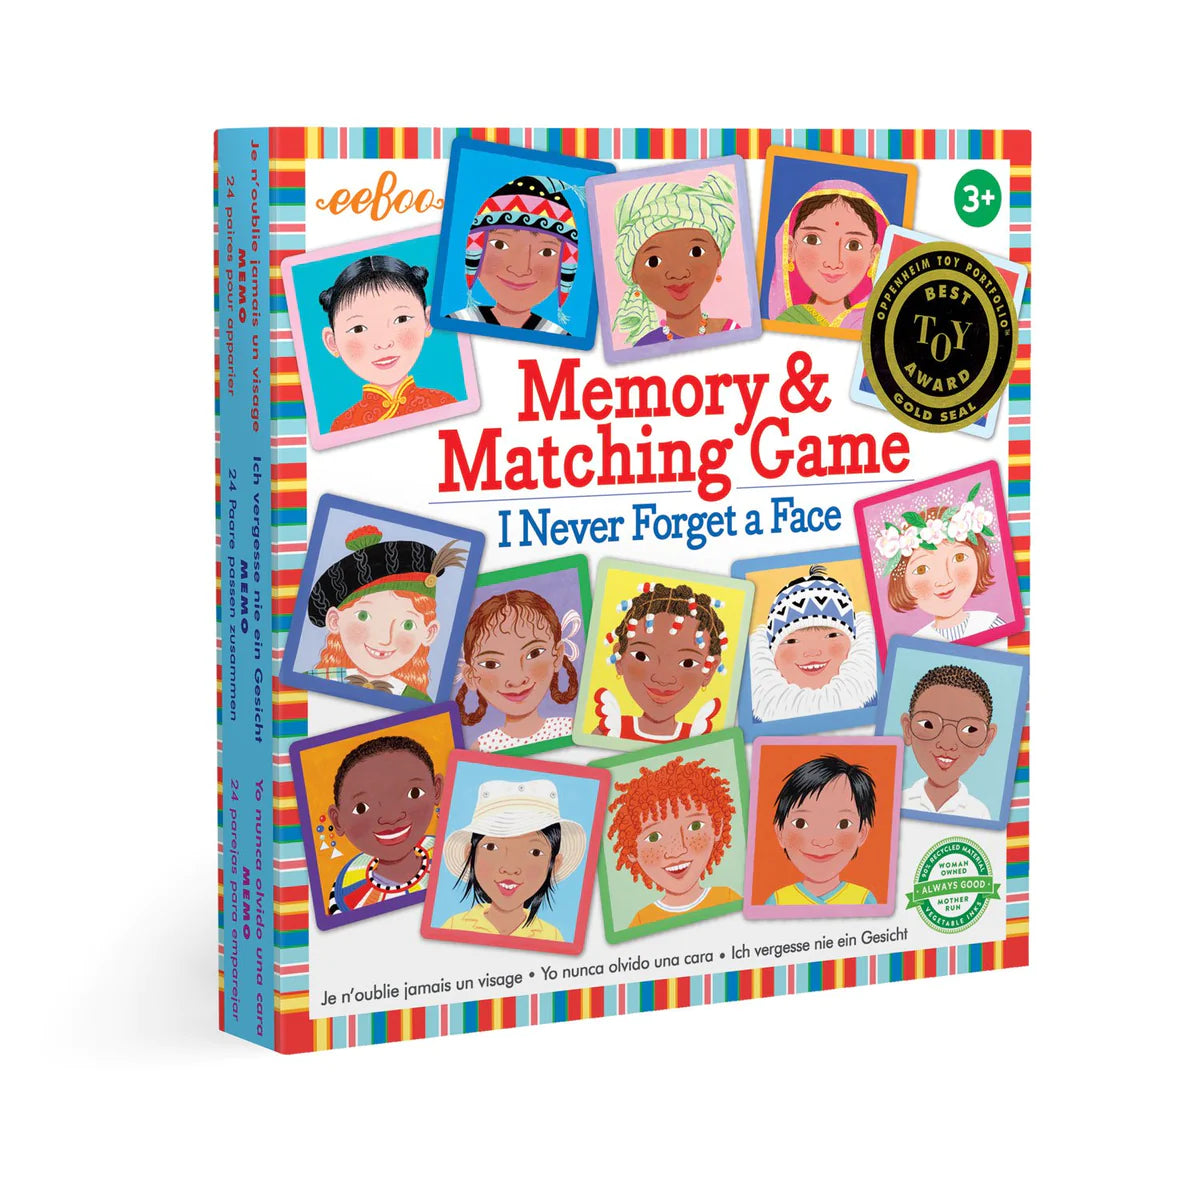 I Never Forget a Face- Memory & Matching Game